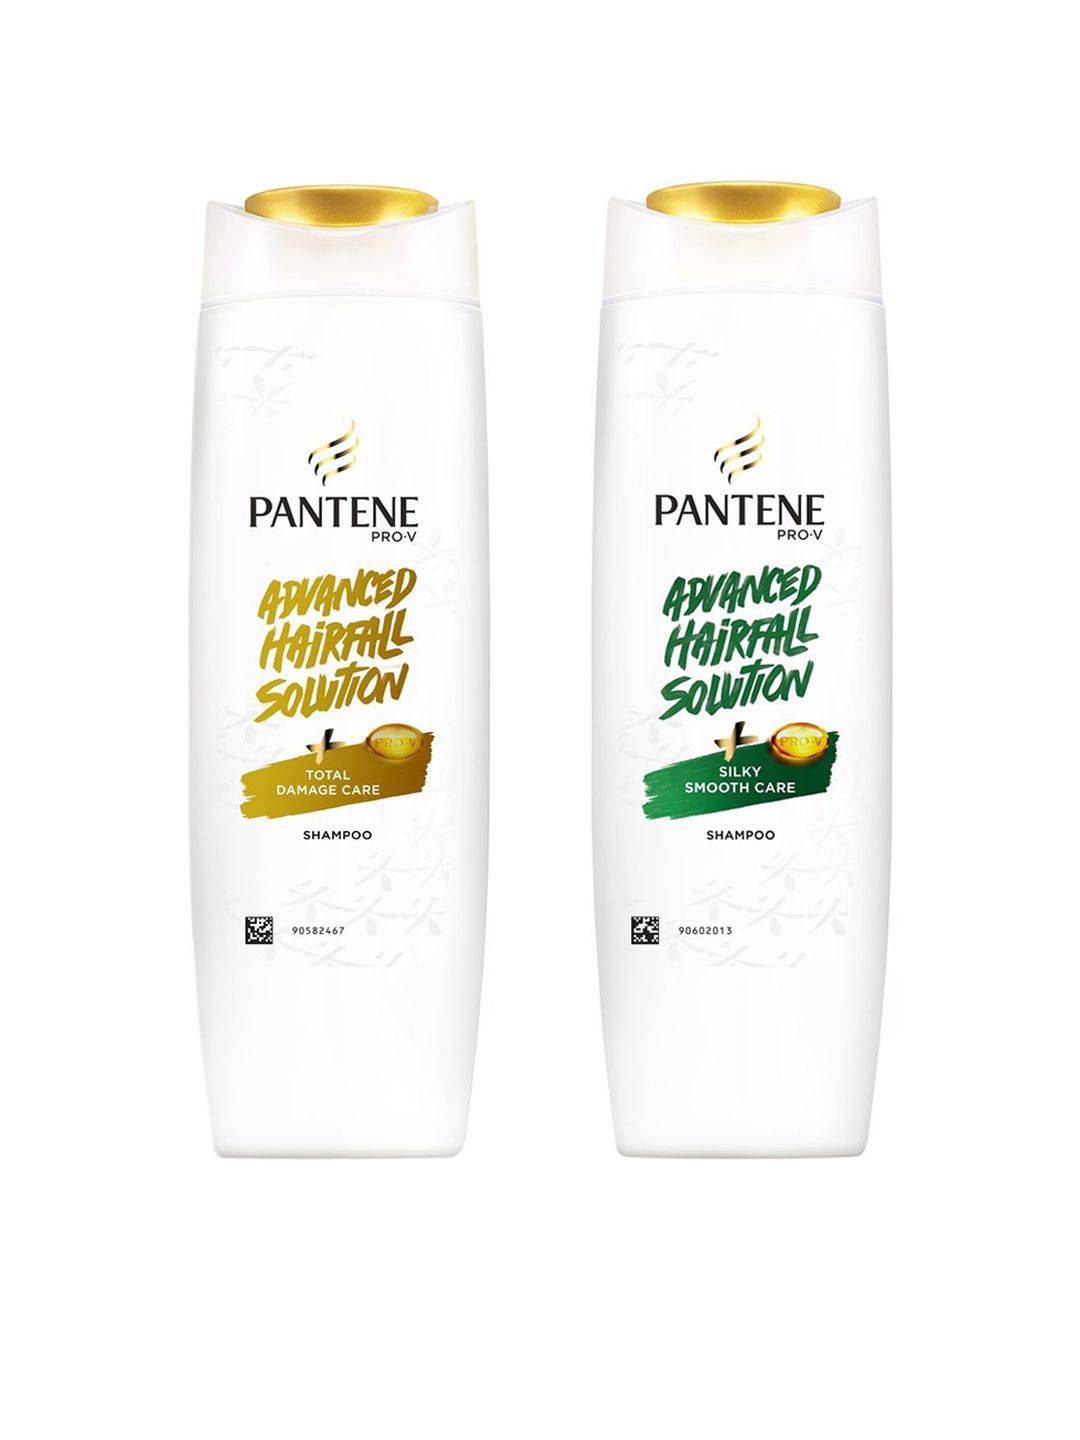 Pantene Set of 2 Advanced Hair Fall Shampoos-Total Damage Care & Silky Smooth Care Price in India